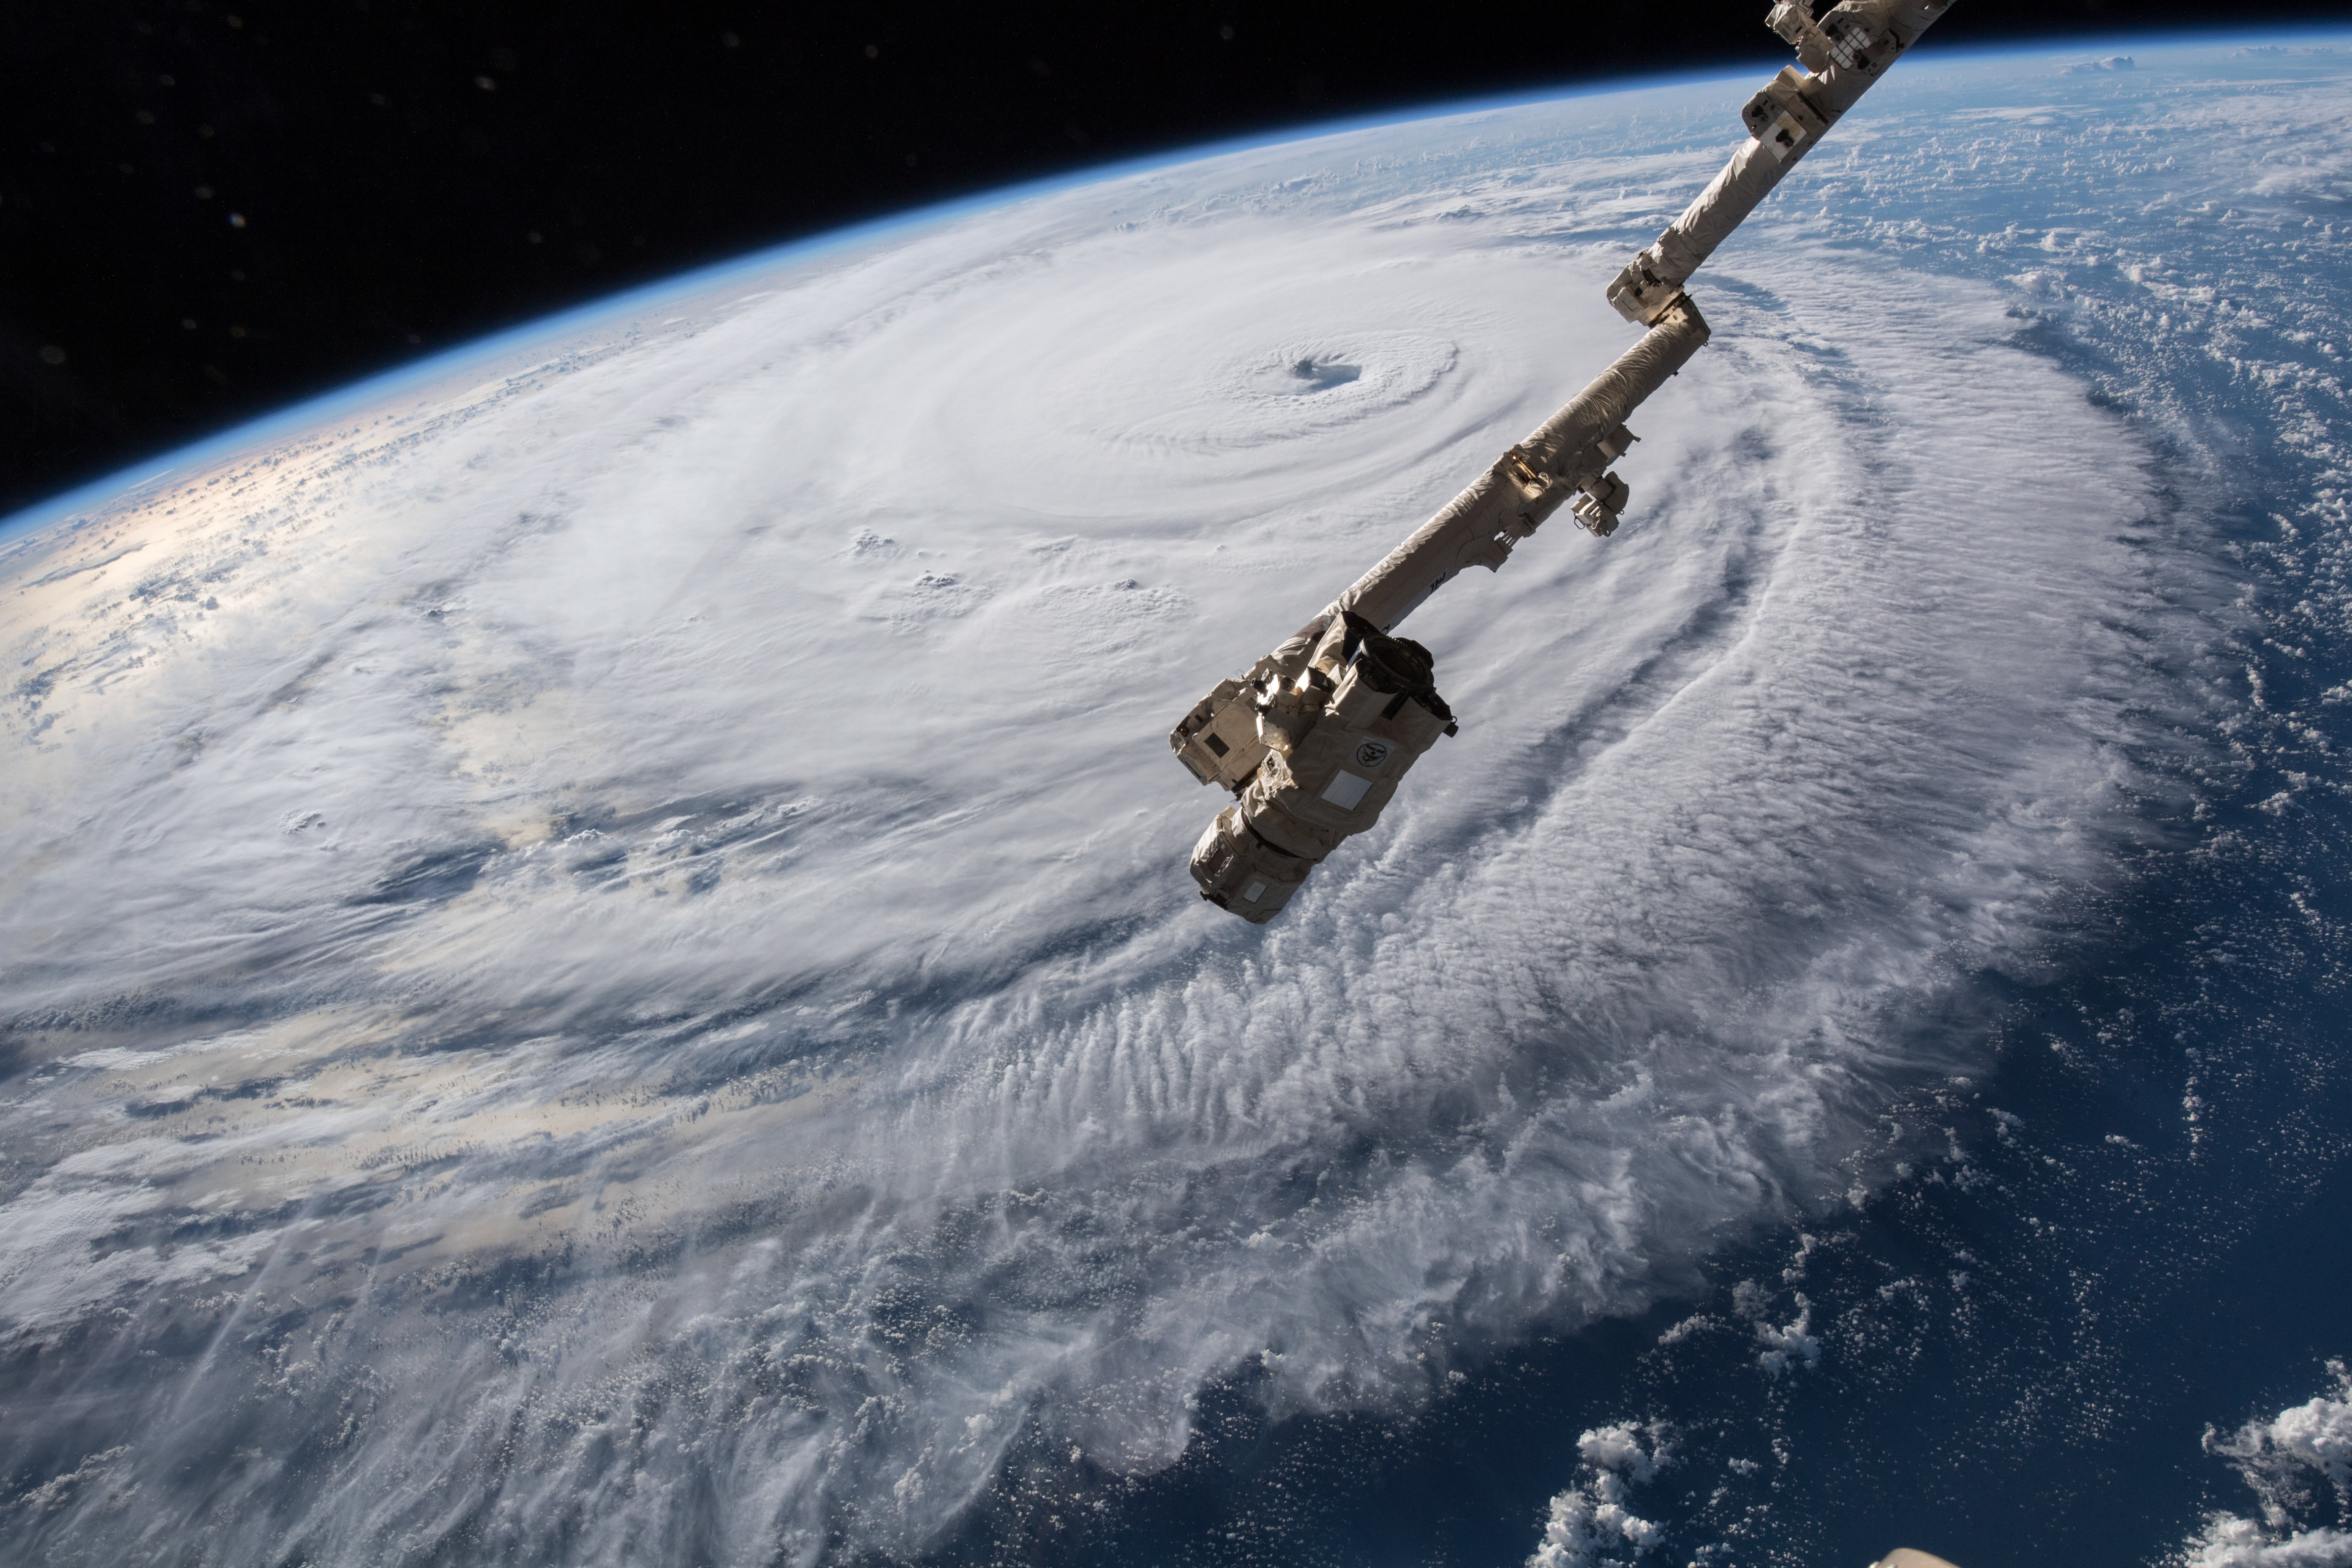 epa07016418 A handout photo made available by NASA on 13 September 2018 shows Hurricane Florence seen from a camera outside the International Space Station (ISS), in space, 12 September 2018, as the storm churned across the Atlantic in a west-northwesterly direction with winds of 130 miles an hour. The National Hurricane Center forecasts additional strengthening for Florence before it reaches the coastline of North Carolina and South Carolina early 14 September.  EPA/NASA HANDOUT  HANDOUT EDITORIAL USE ONLY/NO SALES